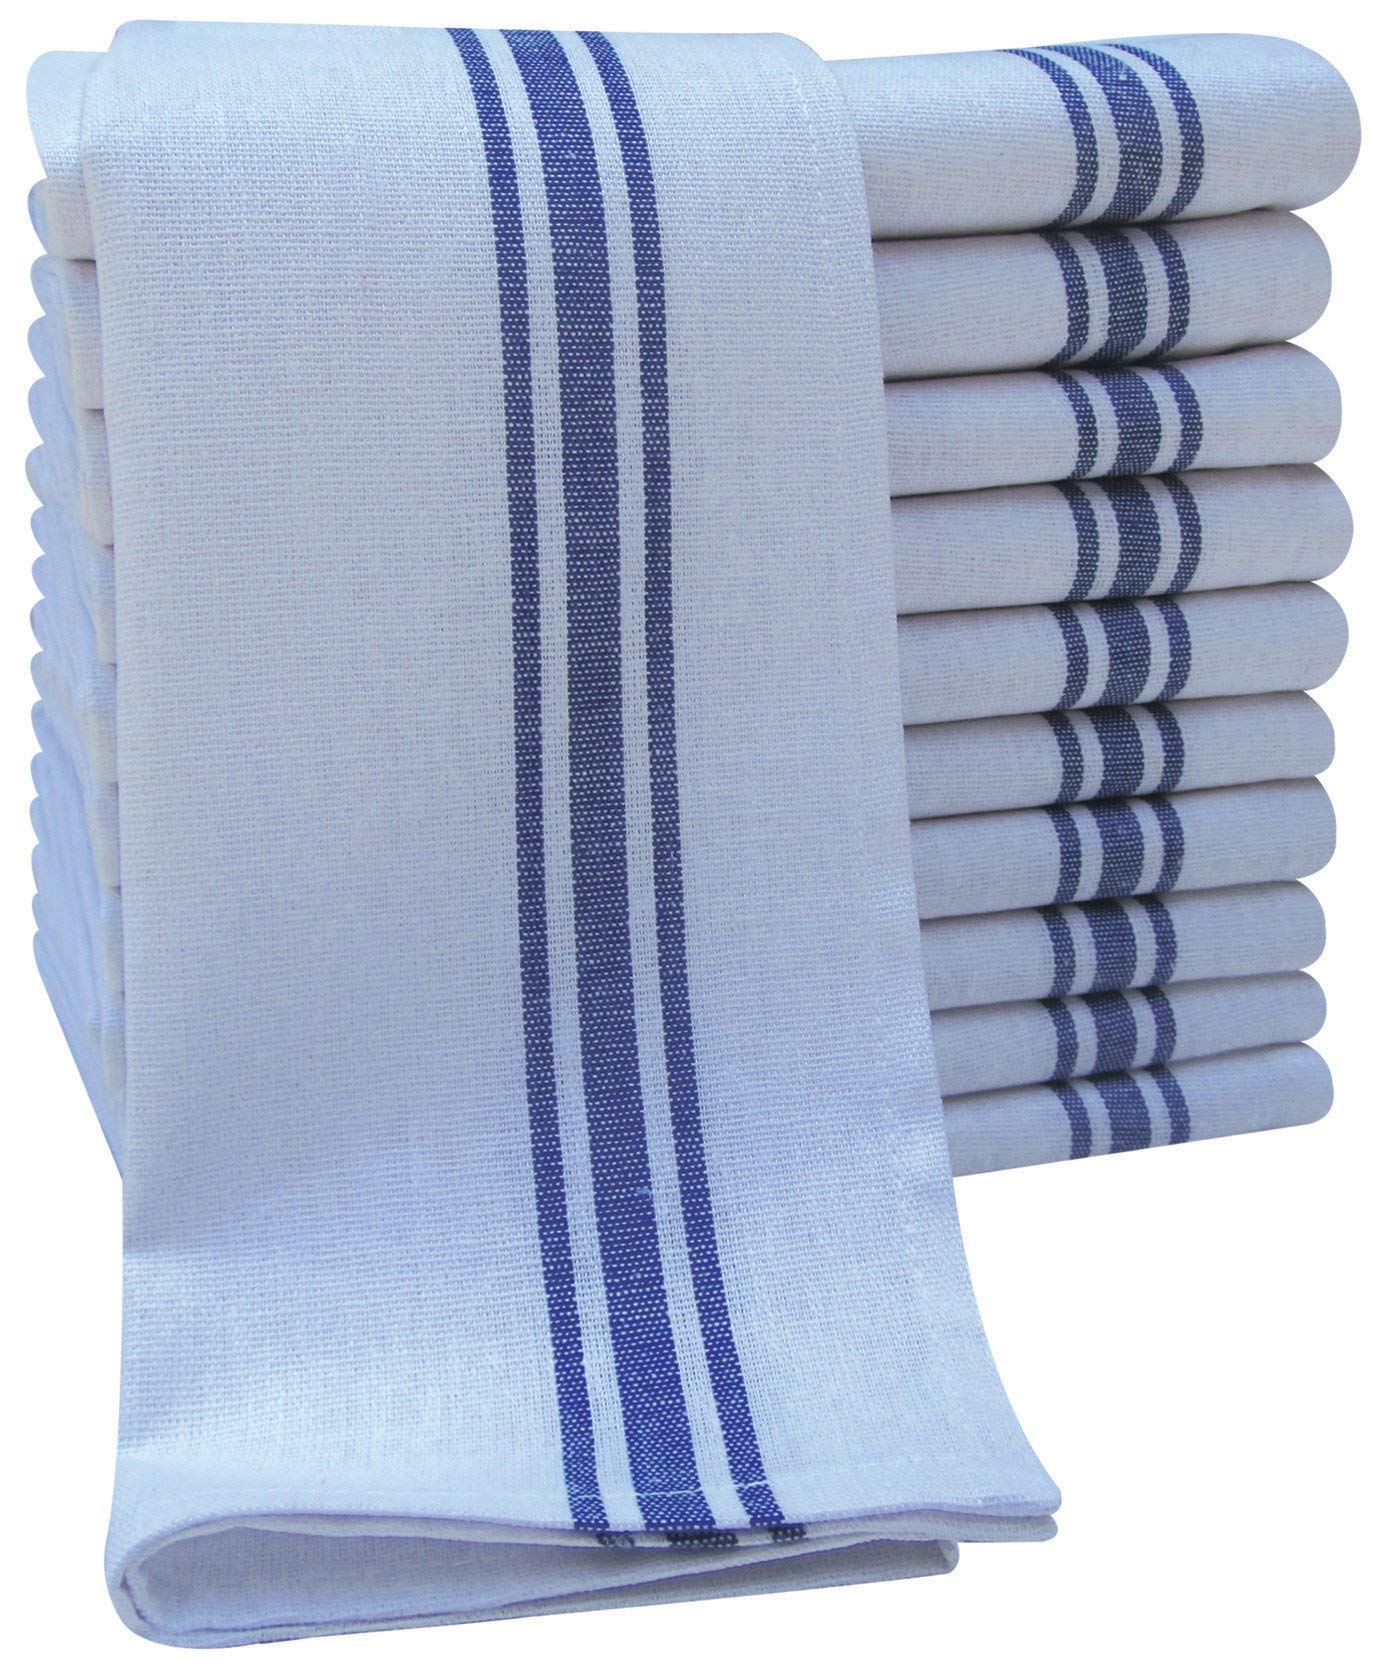 Pack of 10 Professional Catering Tea Towels – Heavy Duty Construction – Absorbent & Quick Dry – High Density Weave- Fade Resistant – Lint Free & No streaks - Bar, Restaurant Cloth (50 x 70 cm)